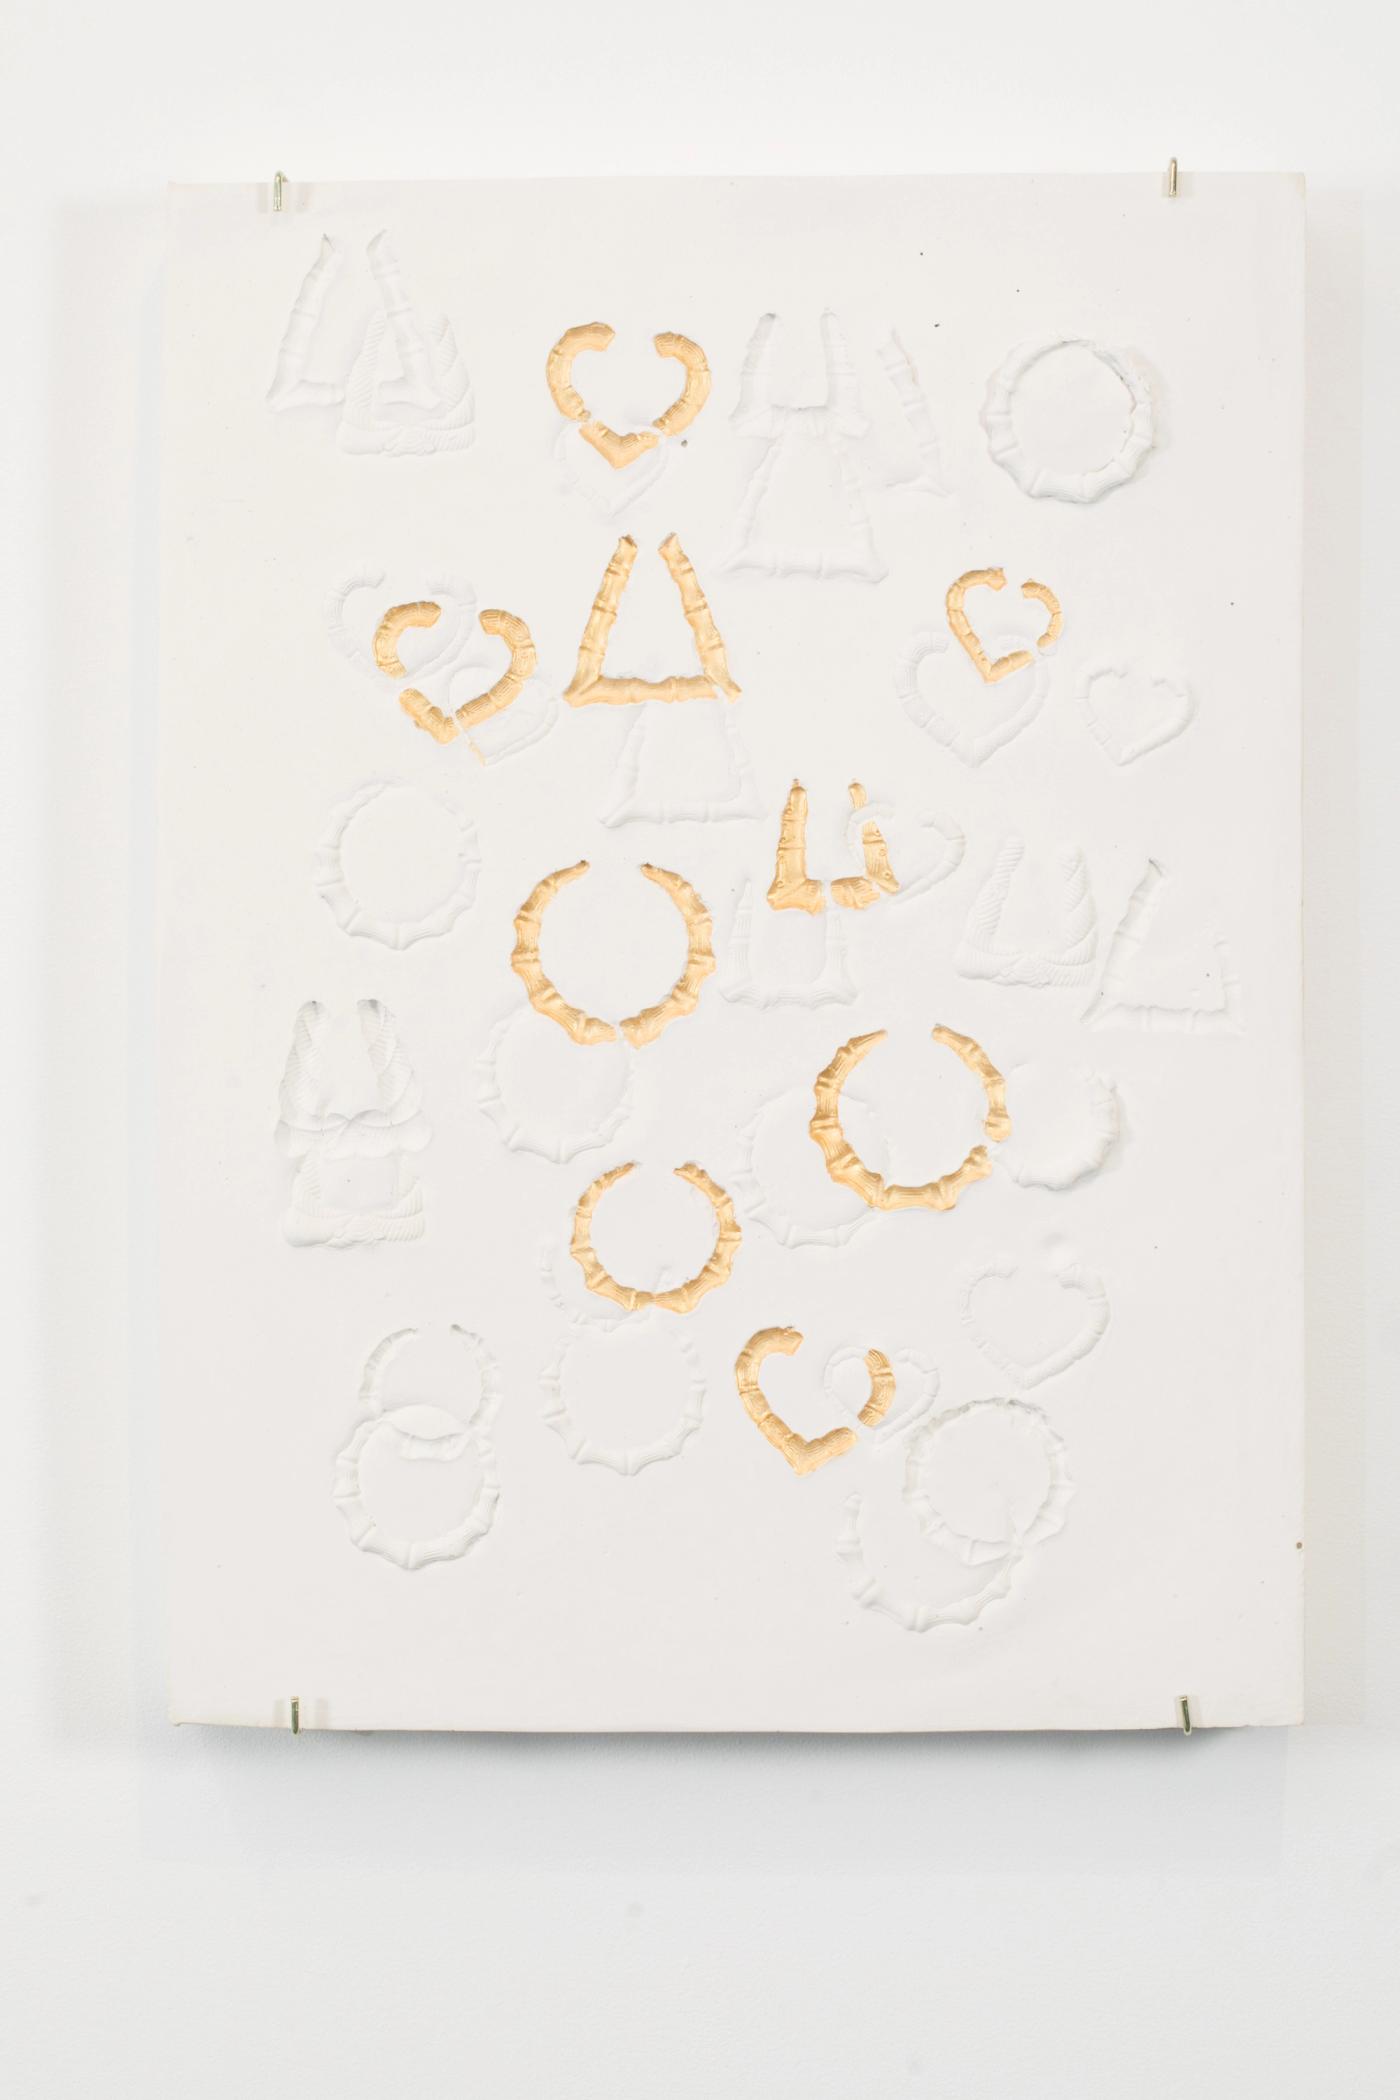 Image of Composition #4 with Doorknocker Earrings and Heart-shaped Earrings, 2023: Plaster and acrylic